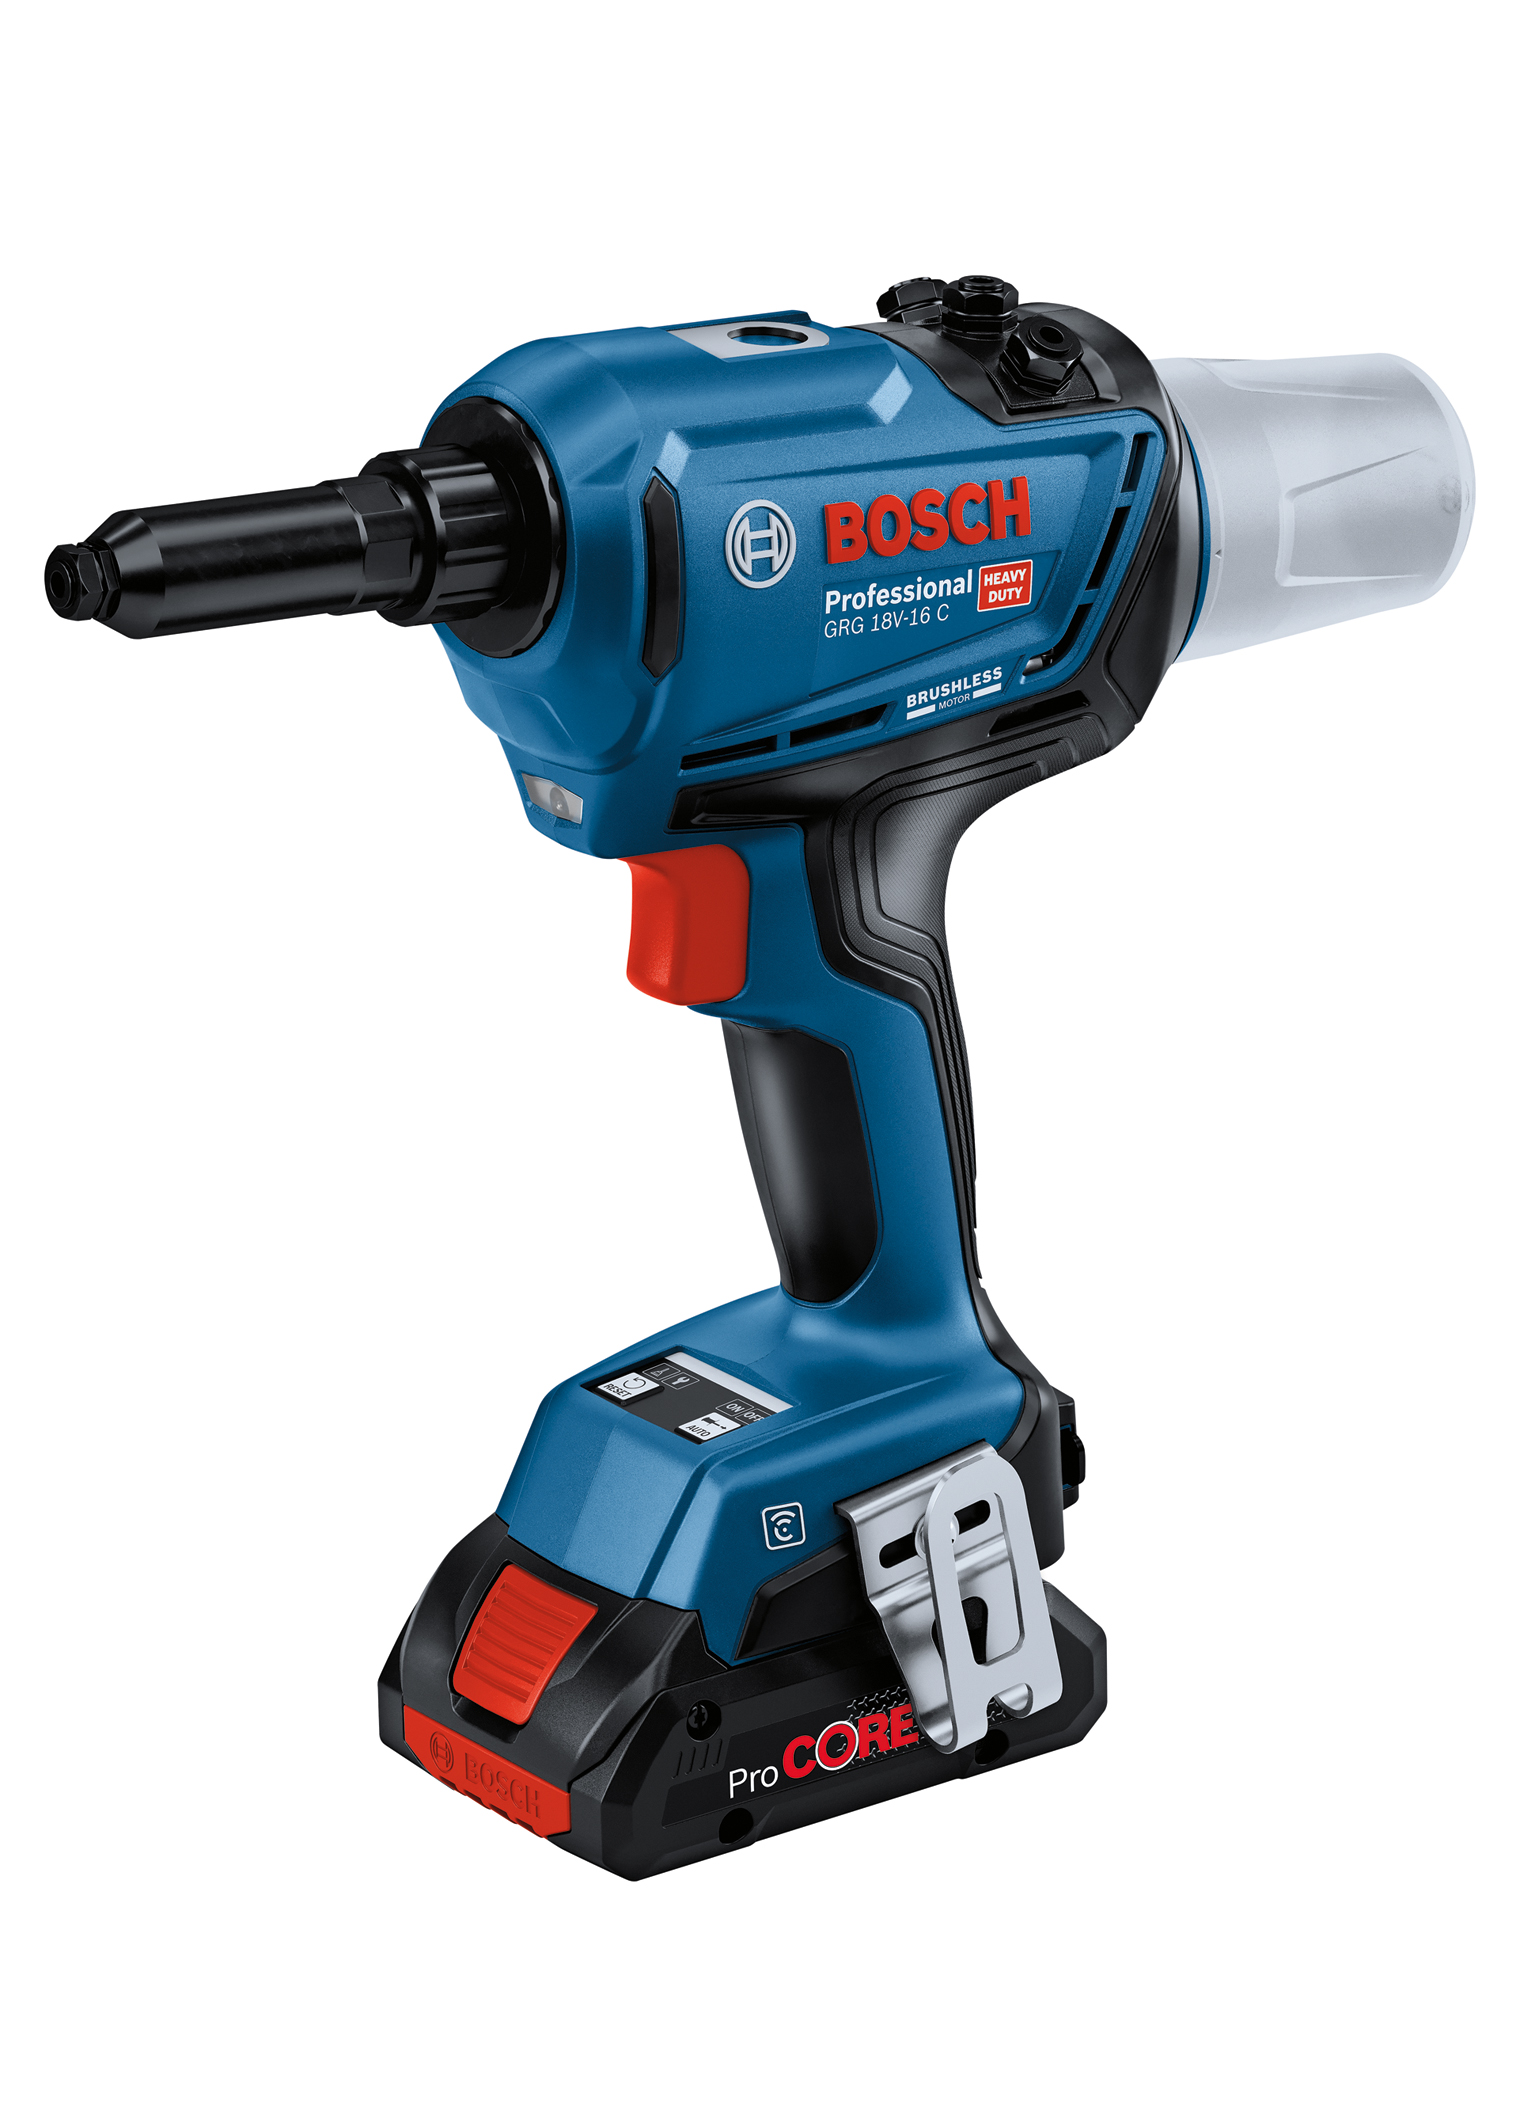 Strong expansion in the 'Professional 18V System': First cordless rivet gun  from Bosch for professionals - Bosch Media Service